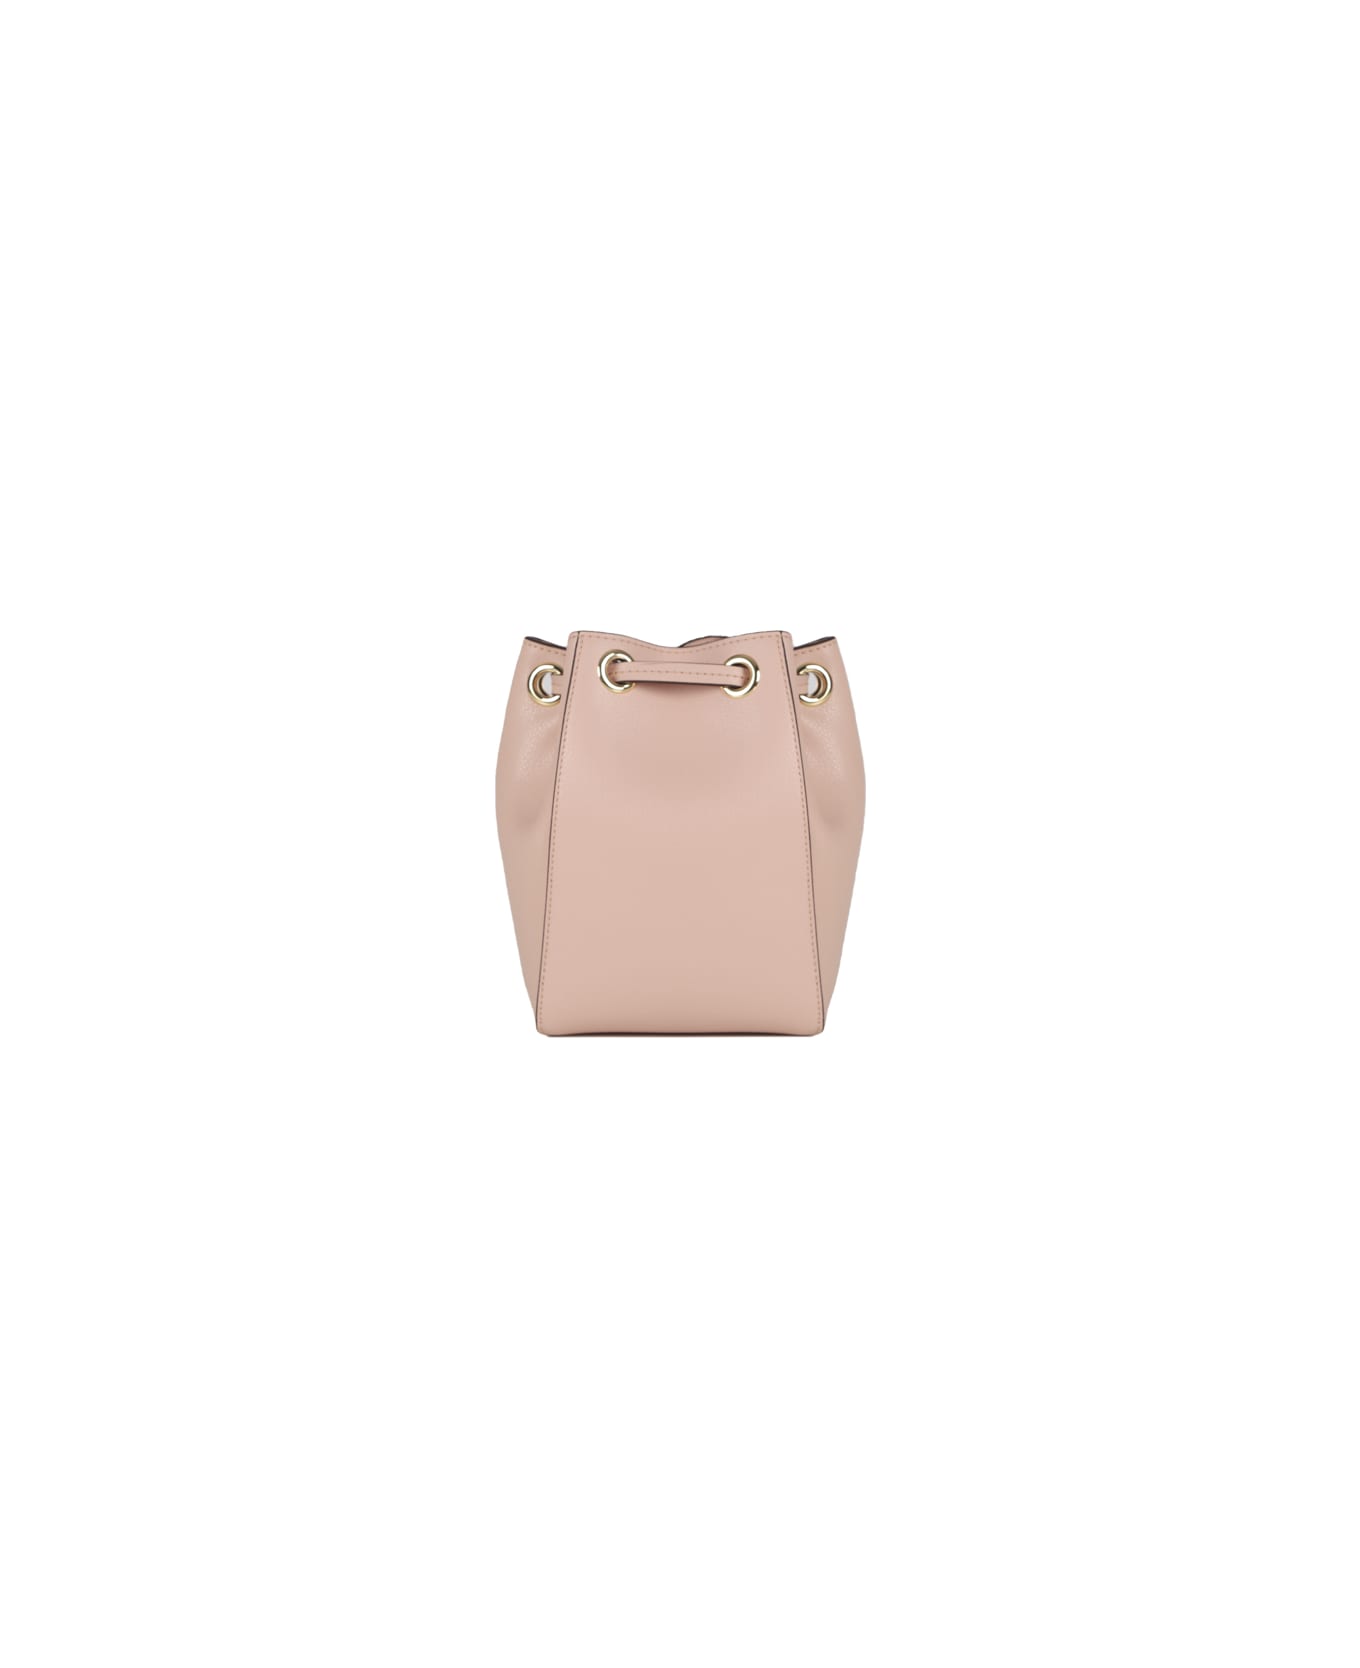 Marc Jacobs The Bucket Bag - Rose pink トートバッグ